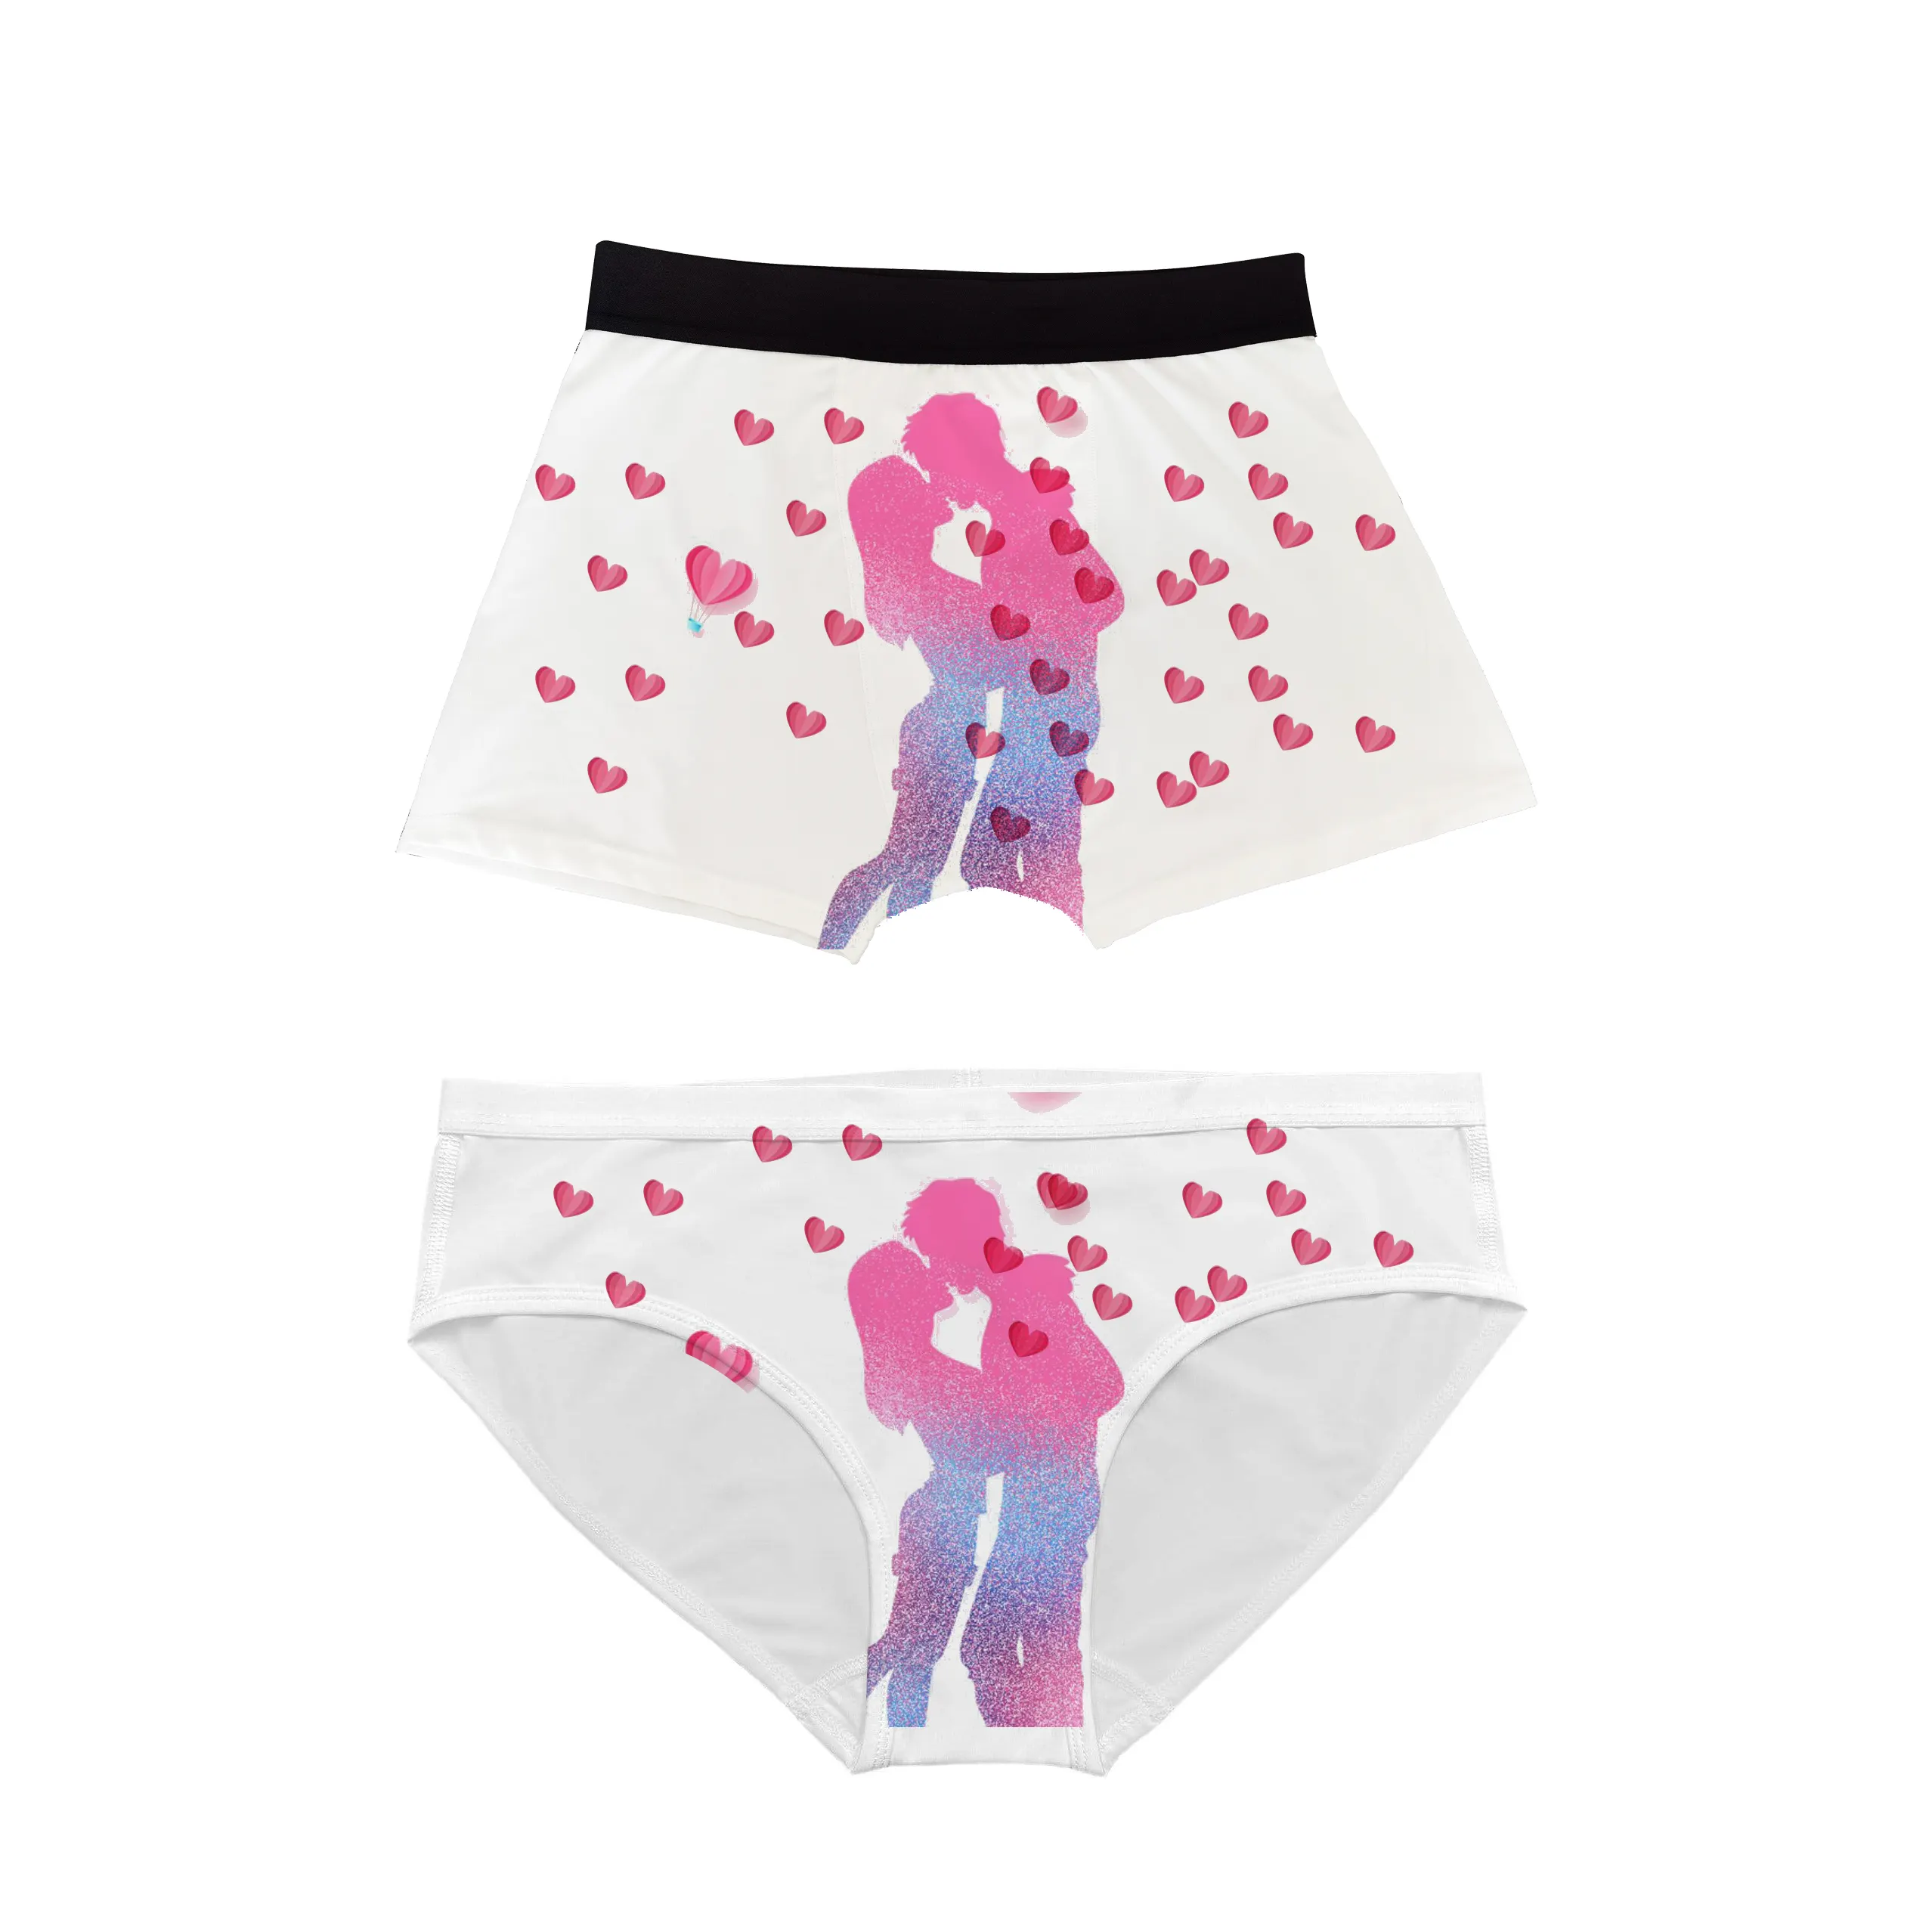 custom man and women blank sublimation underwear boxer briefs for valentines day